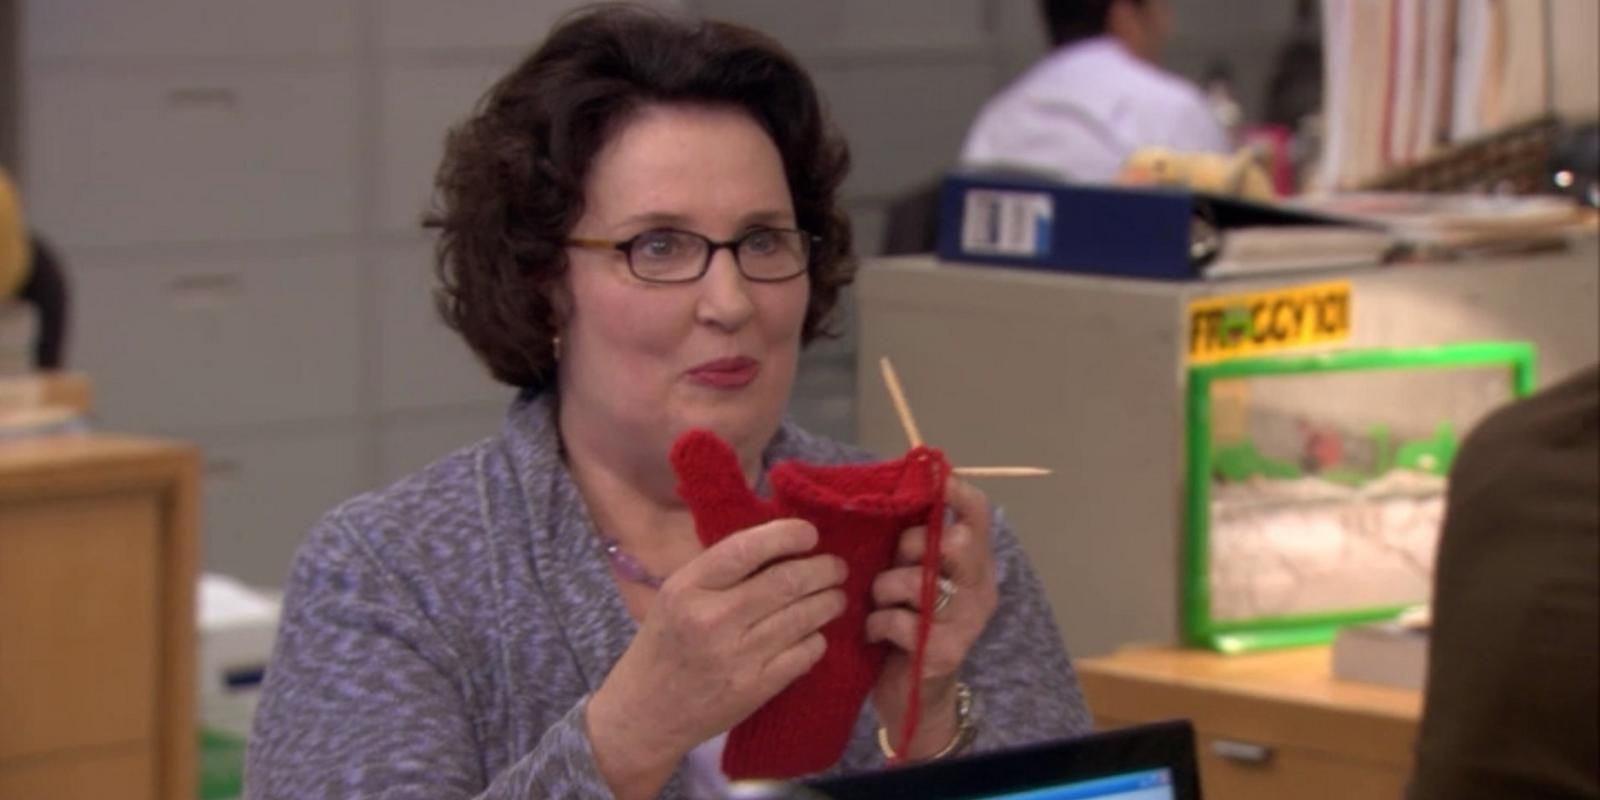 Phyllis knitting on The Office